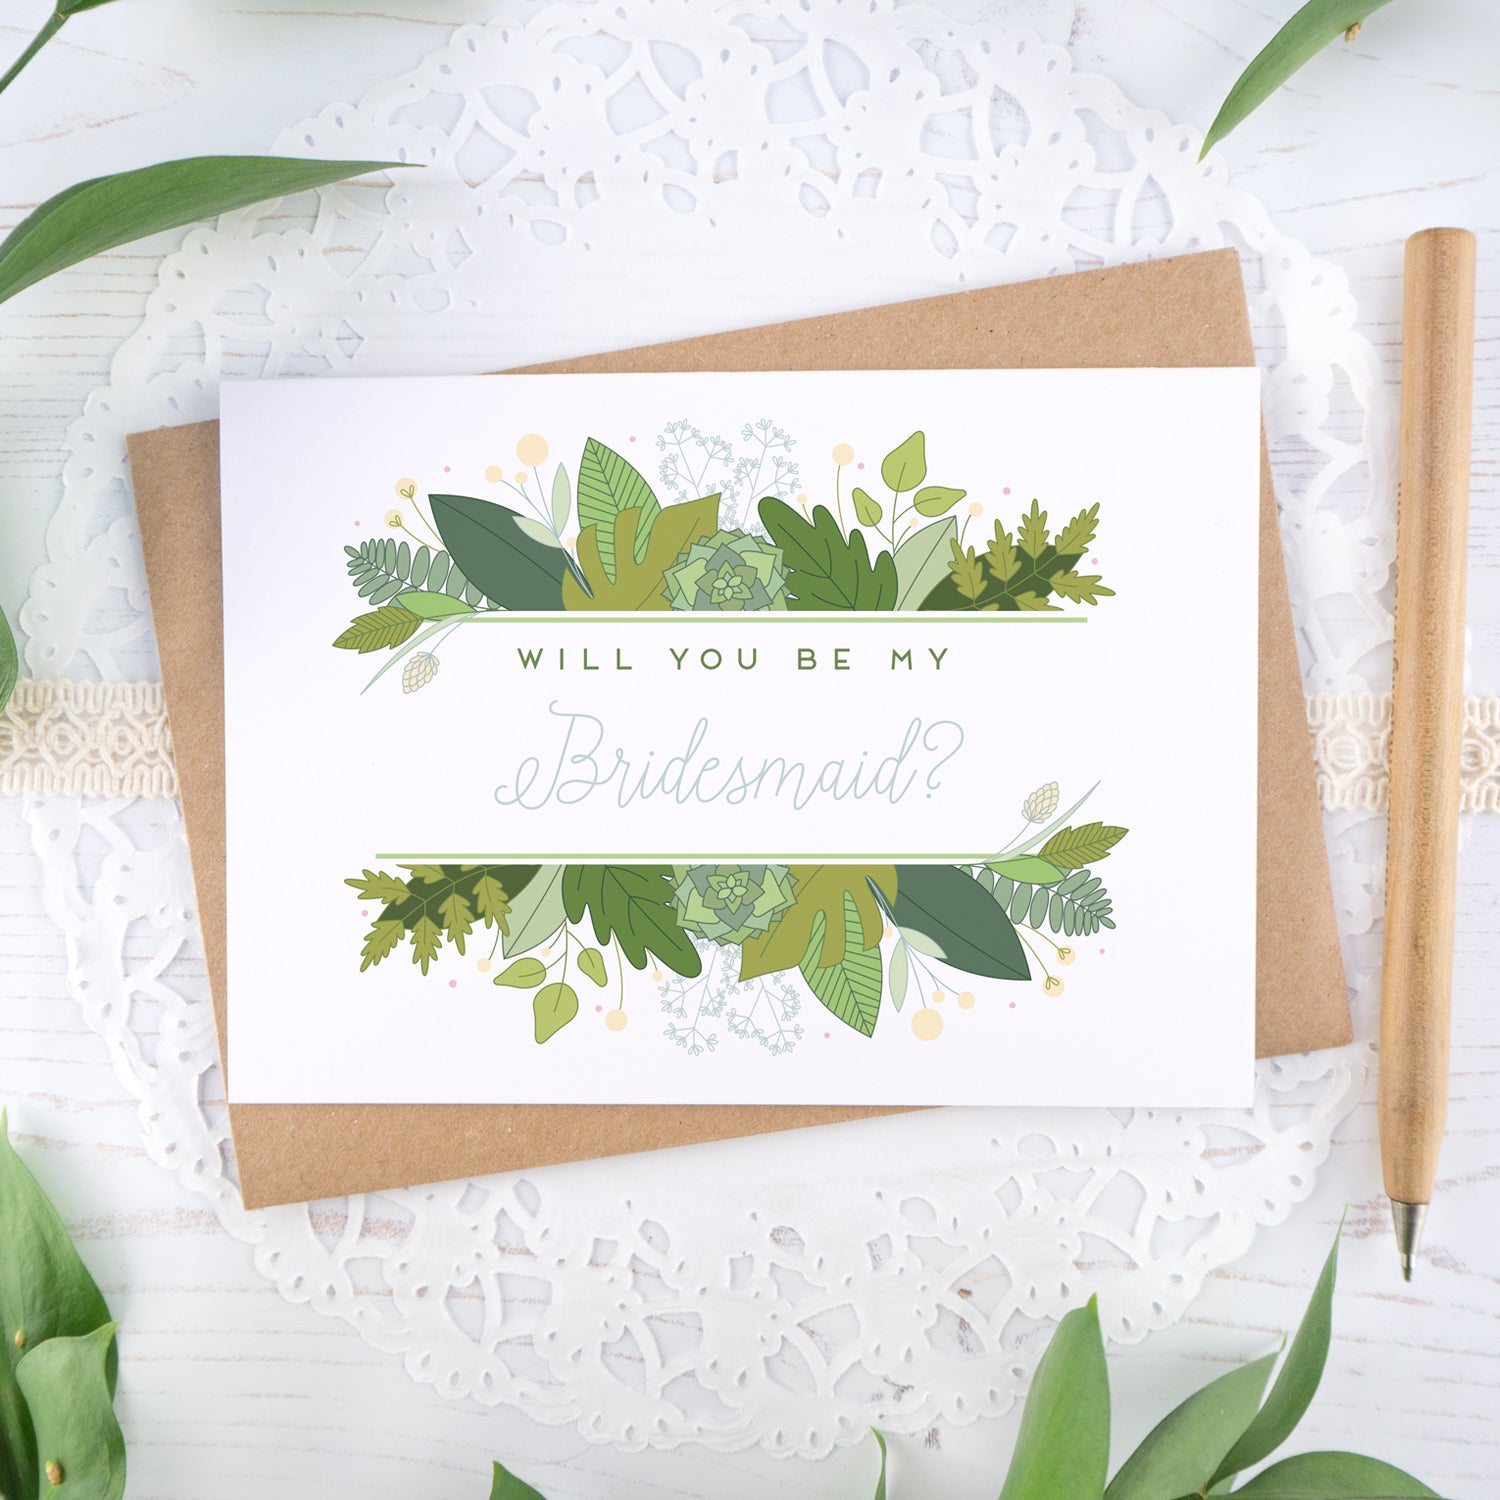 Foliage will you be my bridesmaid card